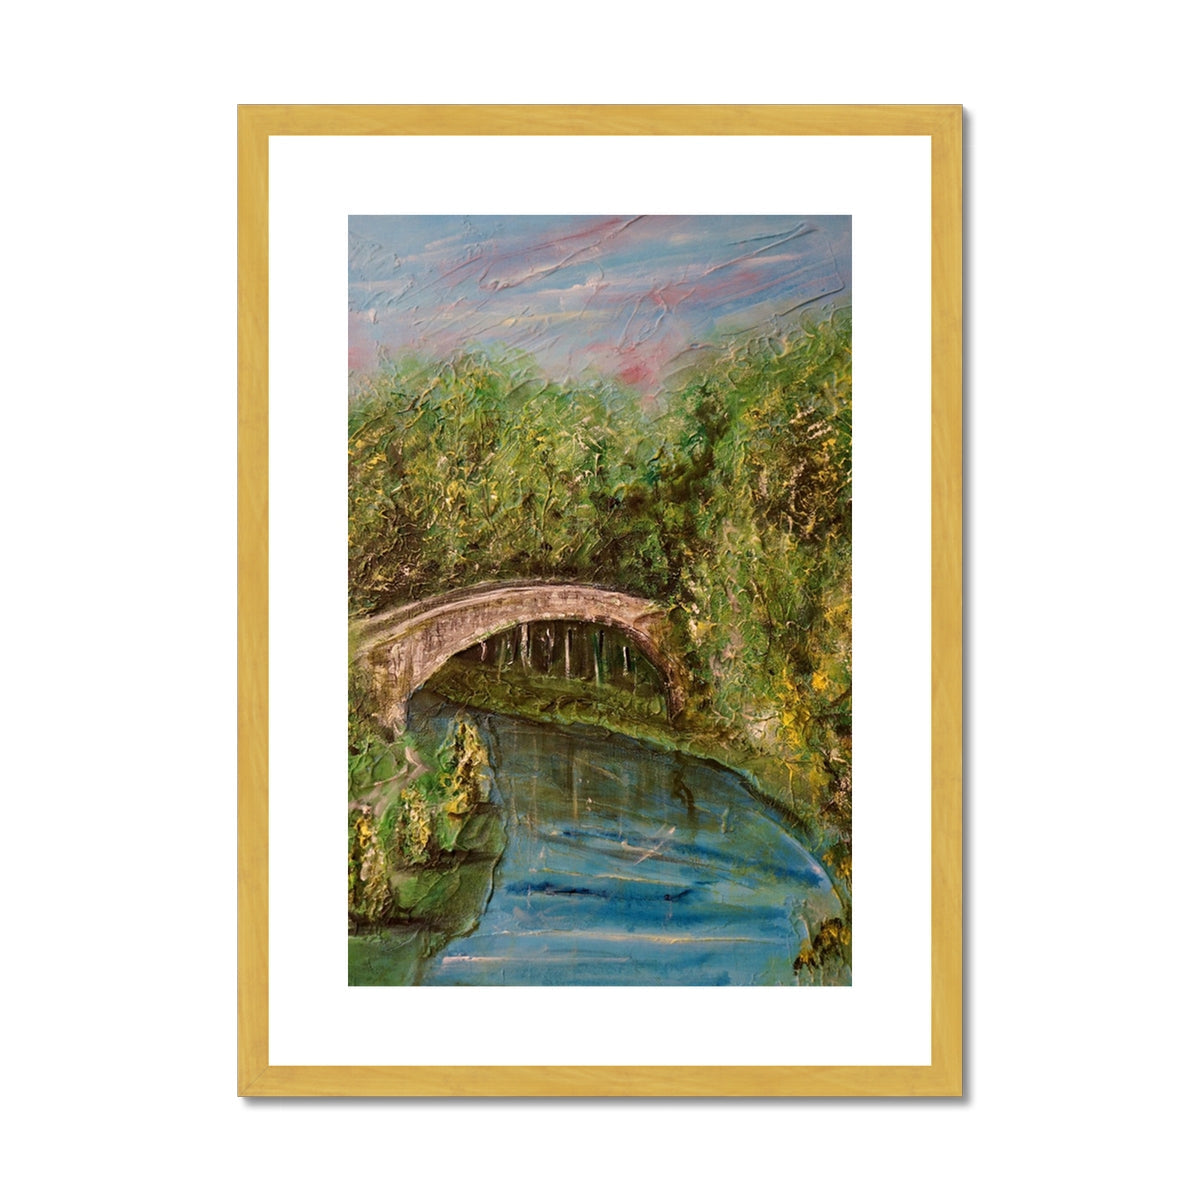 The Brig O Doon Painting | Antique Framed & Mounted Prints From Scotland-Antique Framed & Mounted Prints-Historic & Iconic Scotland Art Gallery-A2 Portrait-Gold Frame-Paintings, Prints, Homeware, Art Gifts From Scotland By Scottish Artist Kevin Hunter